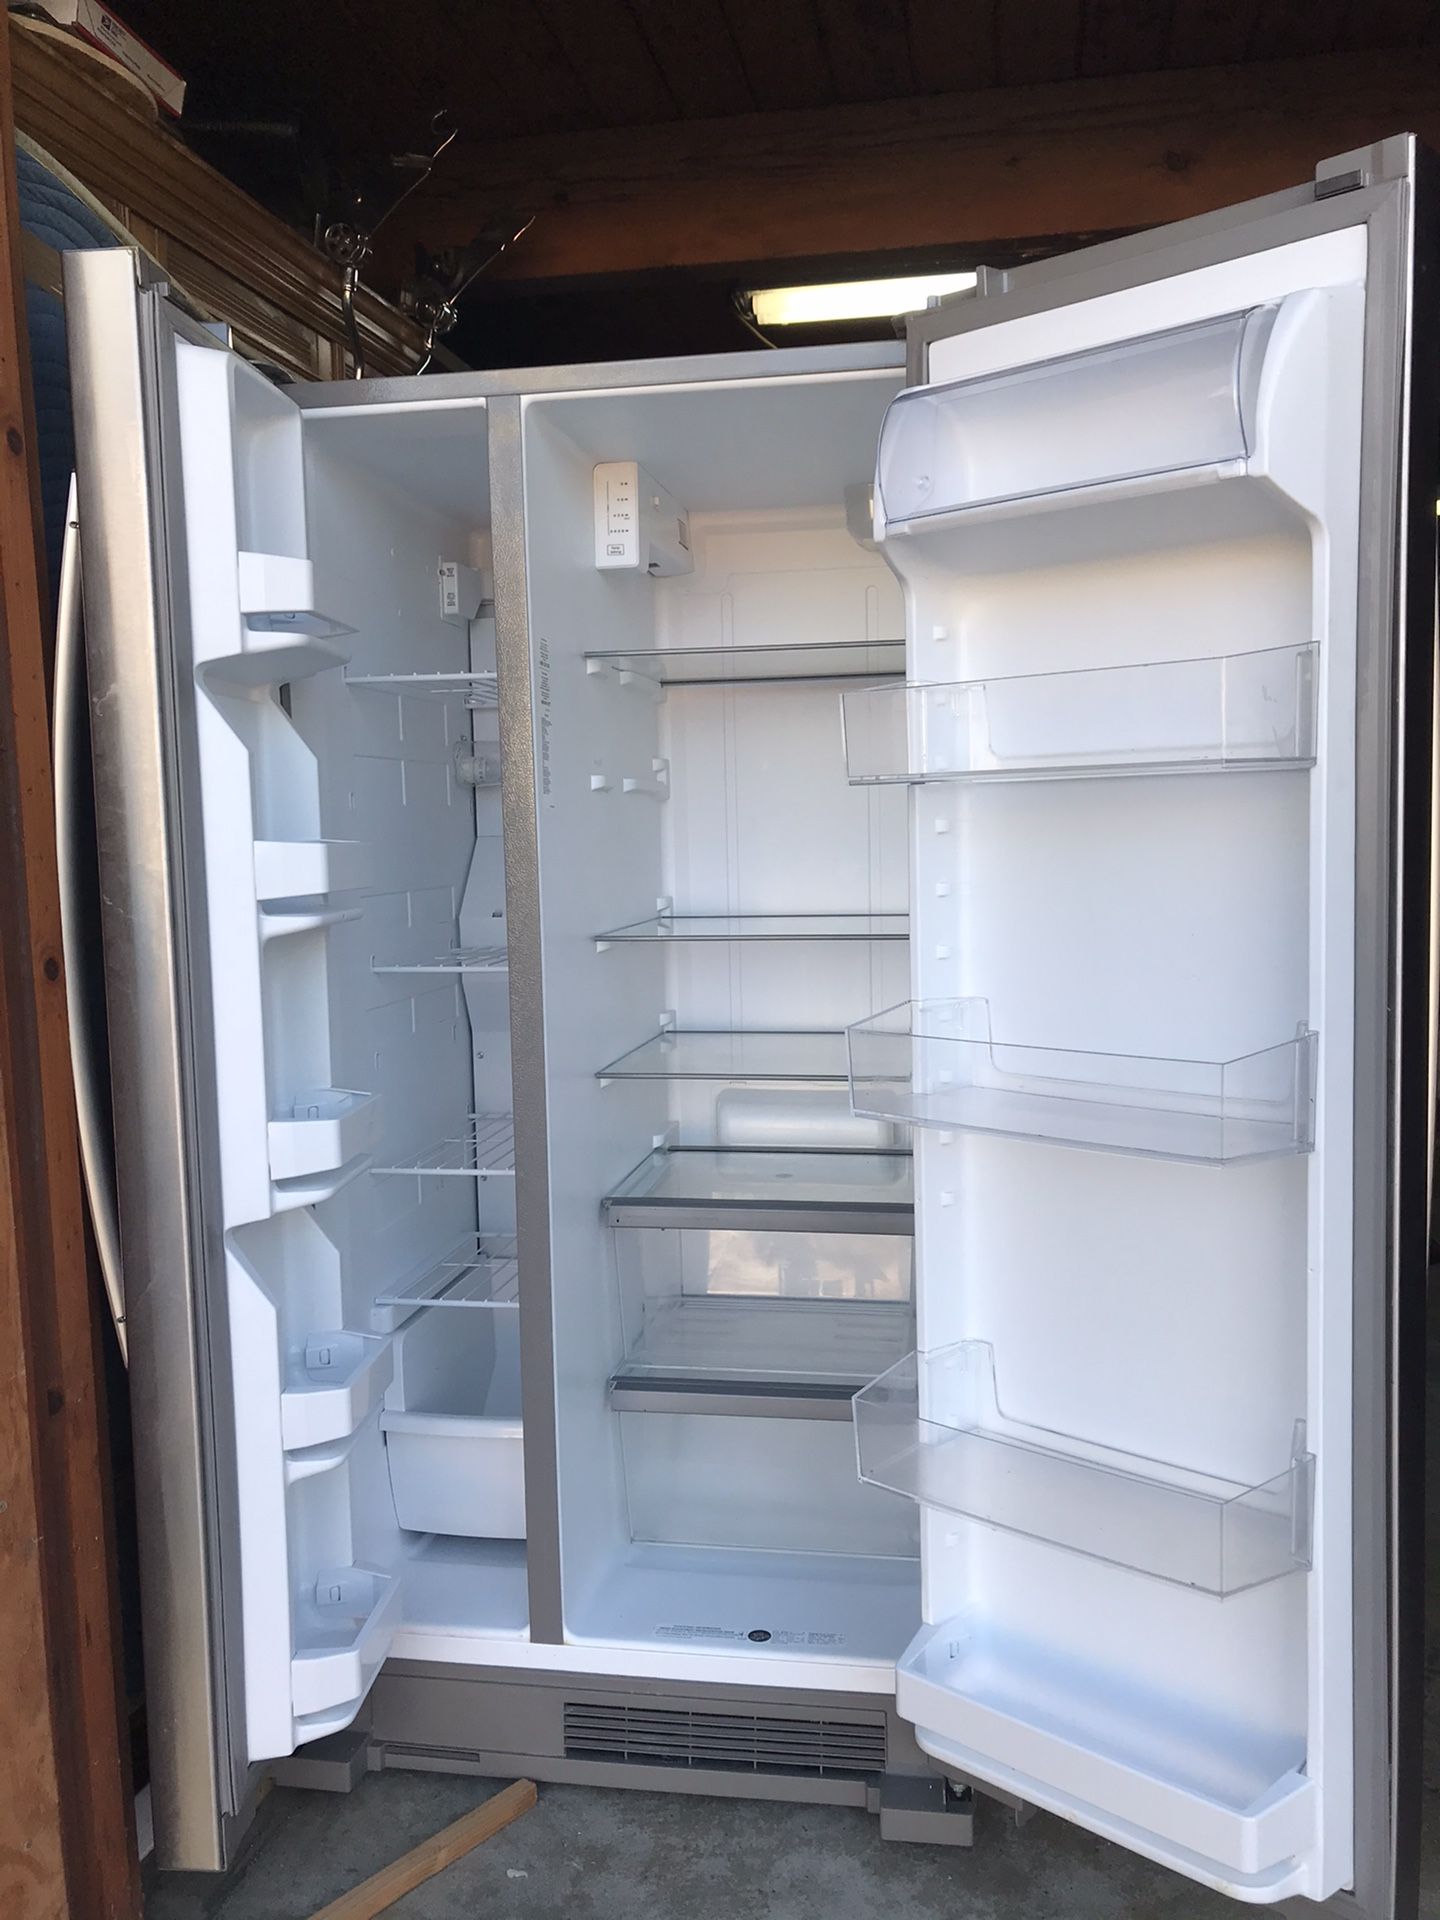 Whirlpool Refrigerator Side by Side Stainless Steel About A Year And A Half New. Too Big For The Area In Our Kitchen. No Icemaker Model.